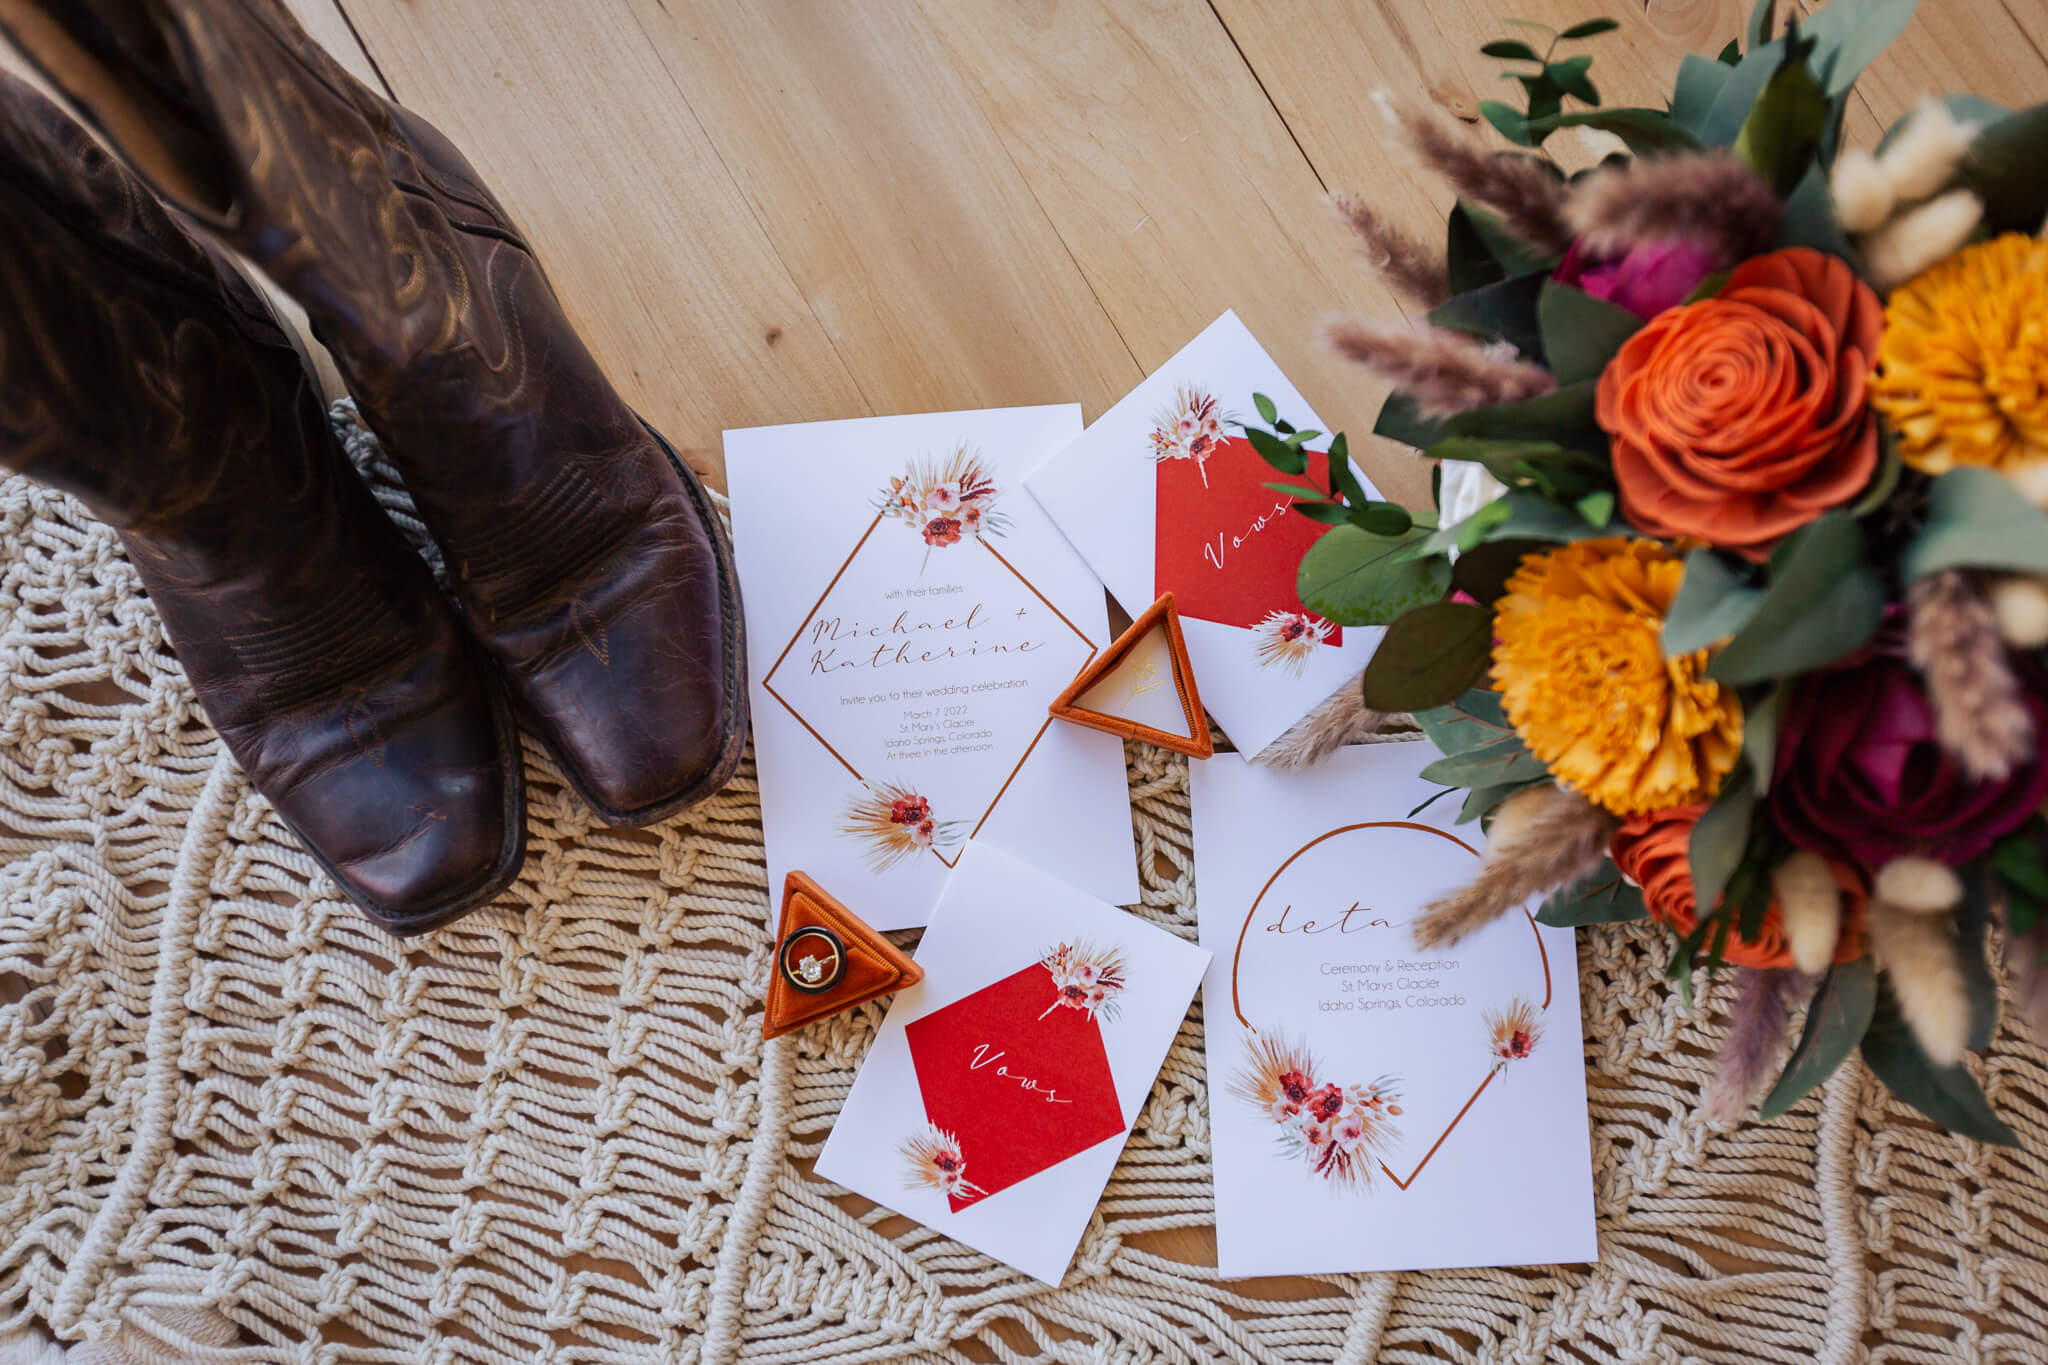 Wedding details: Couple's rings, bouquet and boots